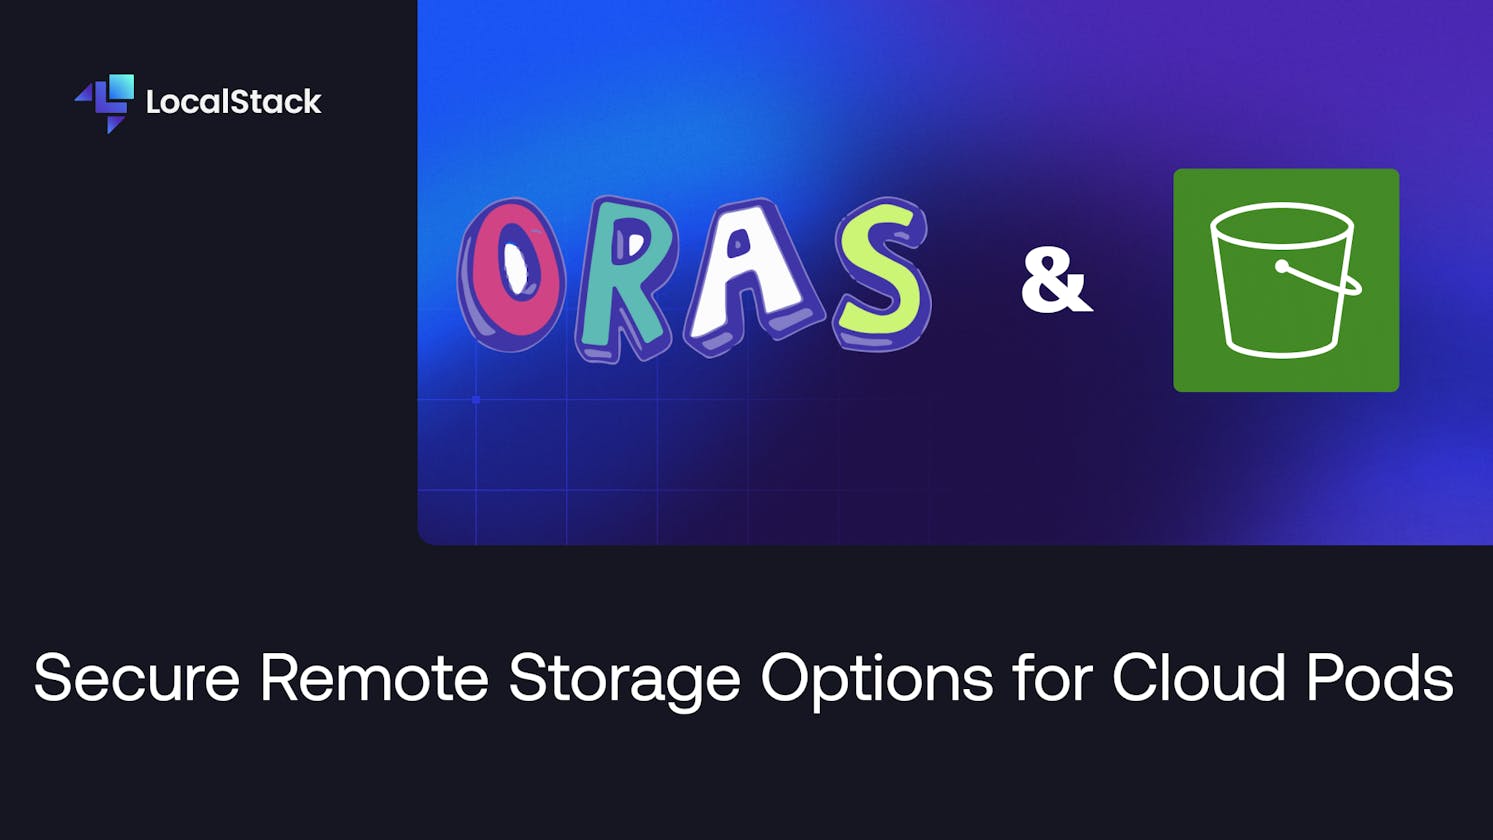 More Remote Storage Options for Your Cloud Pods